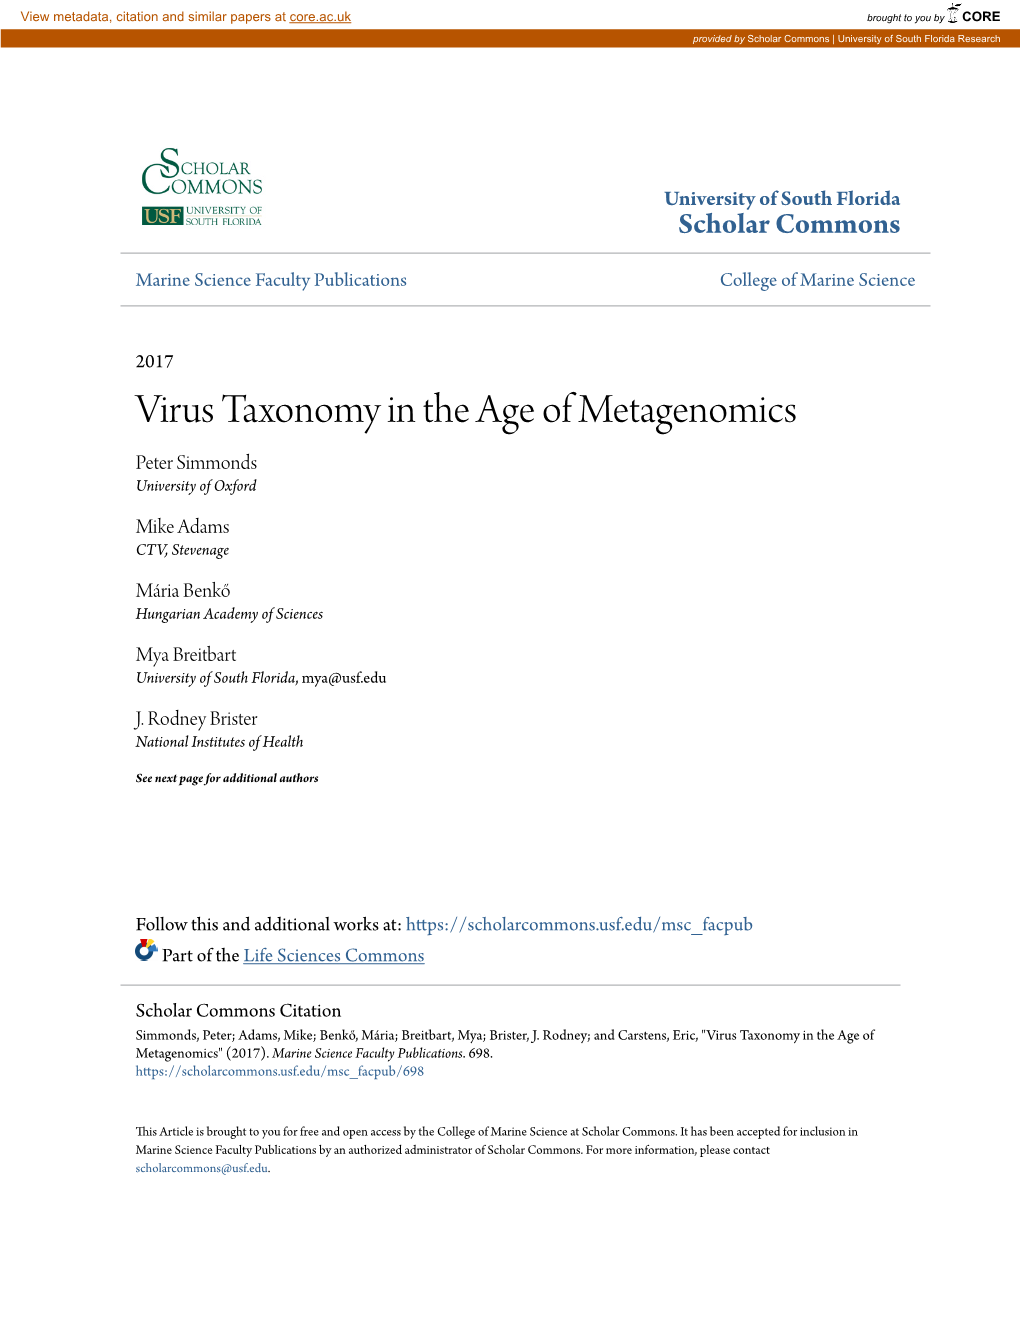 Virus Taxonomy in the Age of Metagenomics Peter Simmonds University of Oxford